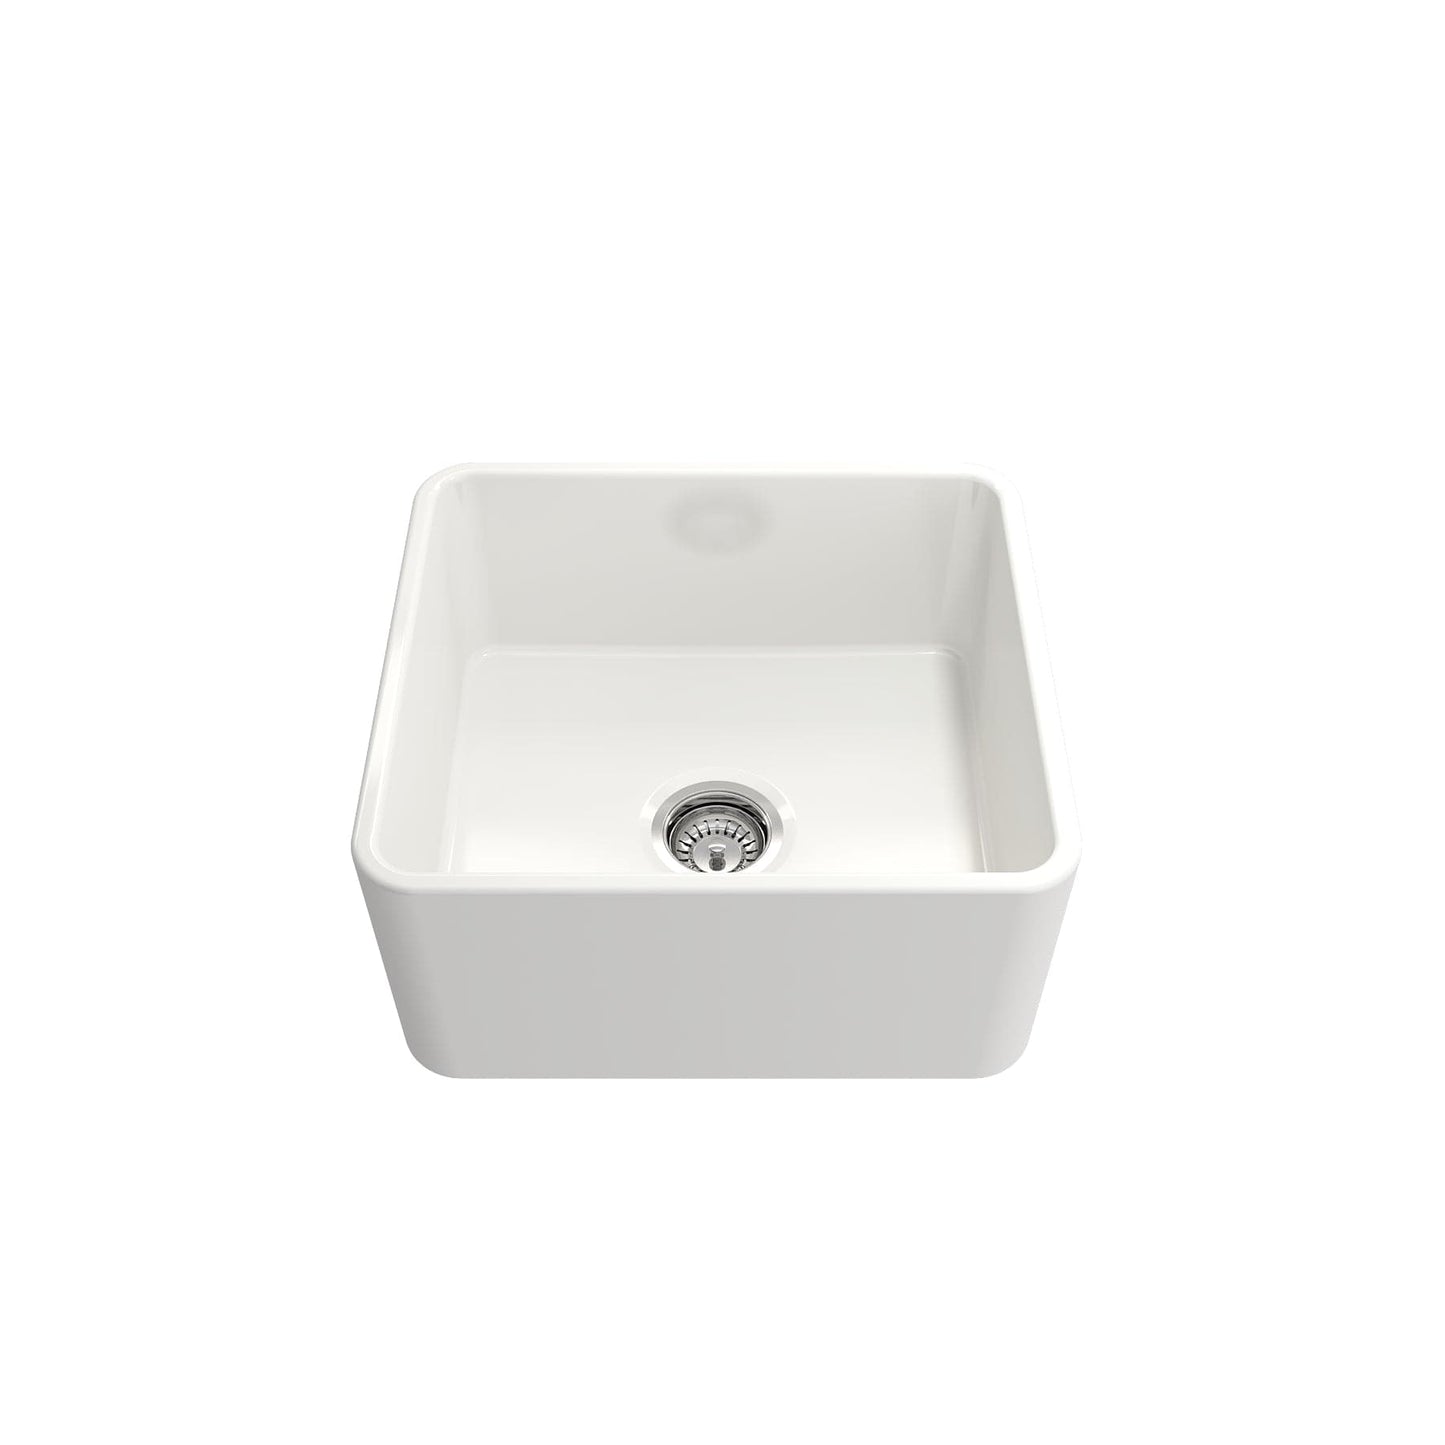 BOCCHI CLASSICO 20" Fireclay Farmhouse Single Bowl Kitchen Sink with Protective Bottom Grid and Strainer, White - 1136-001-0120 - Manor House Sinks